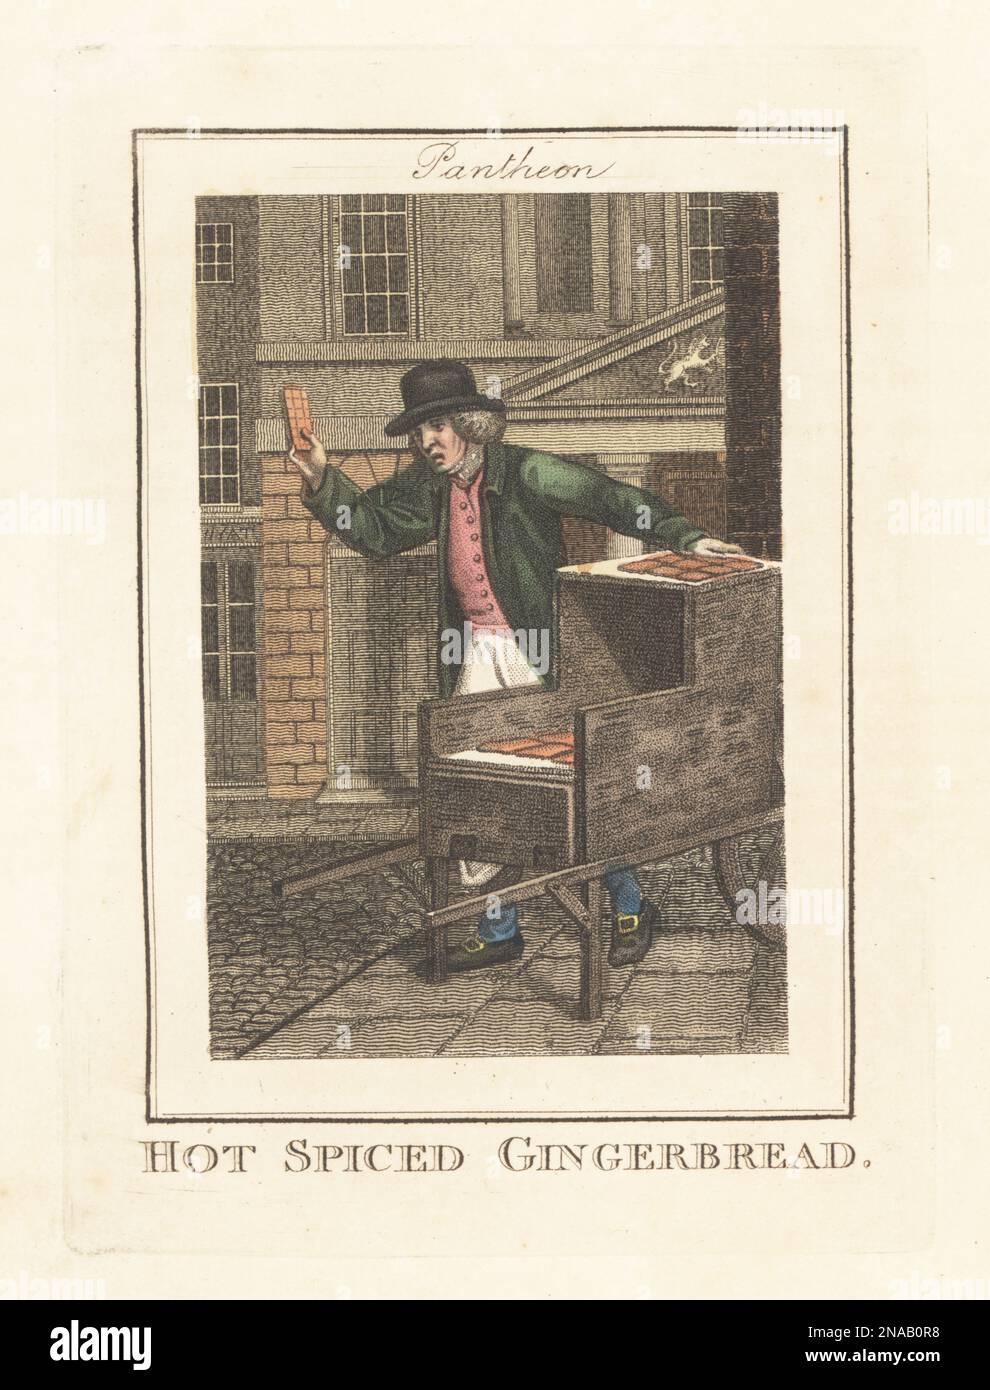 Gingerbread seller in front of the Pantheon, London, 1805. In bowler hat, coat and waistcoat, selling flat cakes of hot spiced gingerbread from a barrow. In front of the Pantheon on Oxford Street, a hall used for music concerts and masquerade balls. Handcoloured copperplate engraving by Edward Edwards after an illustration by William Marshall Craig from Description of the Plates Representing the Itinerant Traders of London, Richard Phillips, No. 71 St Paul’s Churchyard, London, 1805. Stock Photo